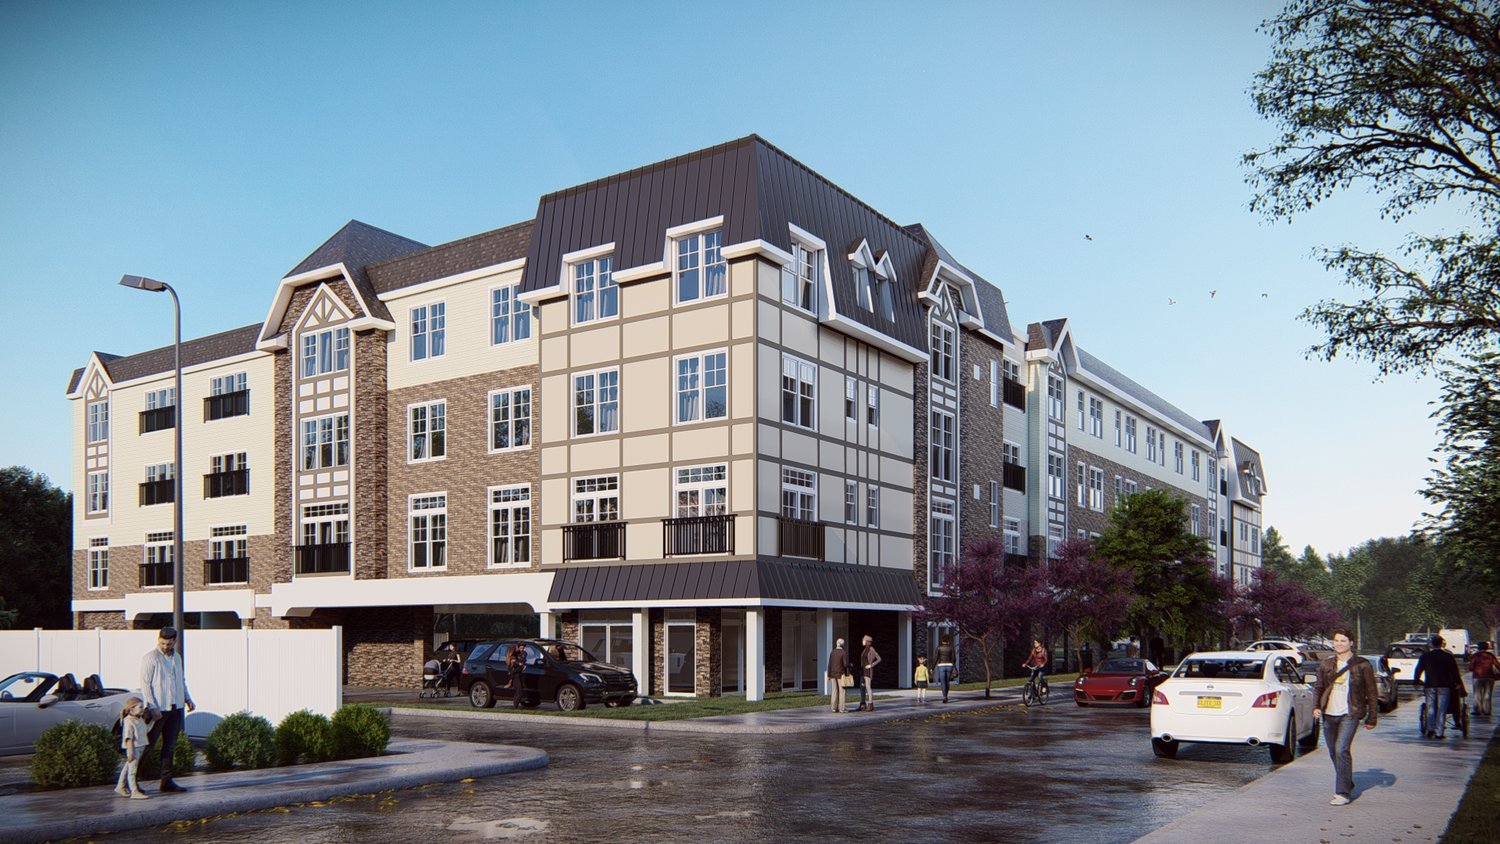 On Monday, The Lynbrook village board approved a developer’s plan to build luxury rental apartments at the site of the Lynbrook Motor Inn. Above, a rendering of the proposed complex.